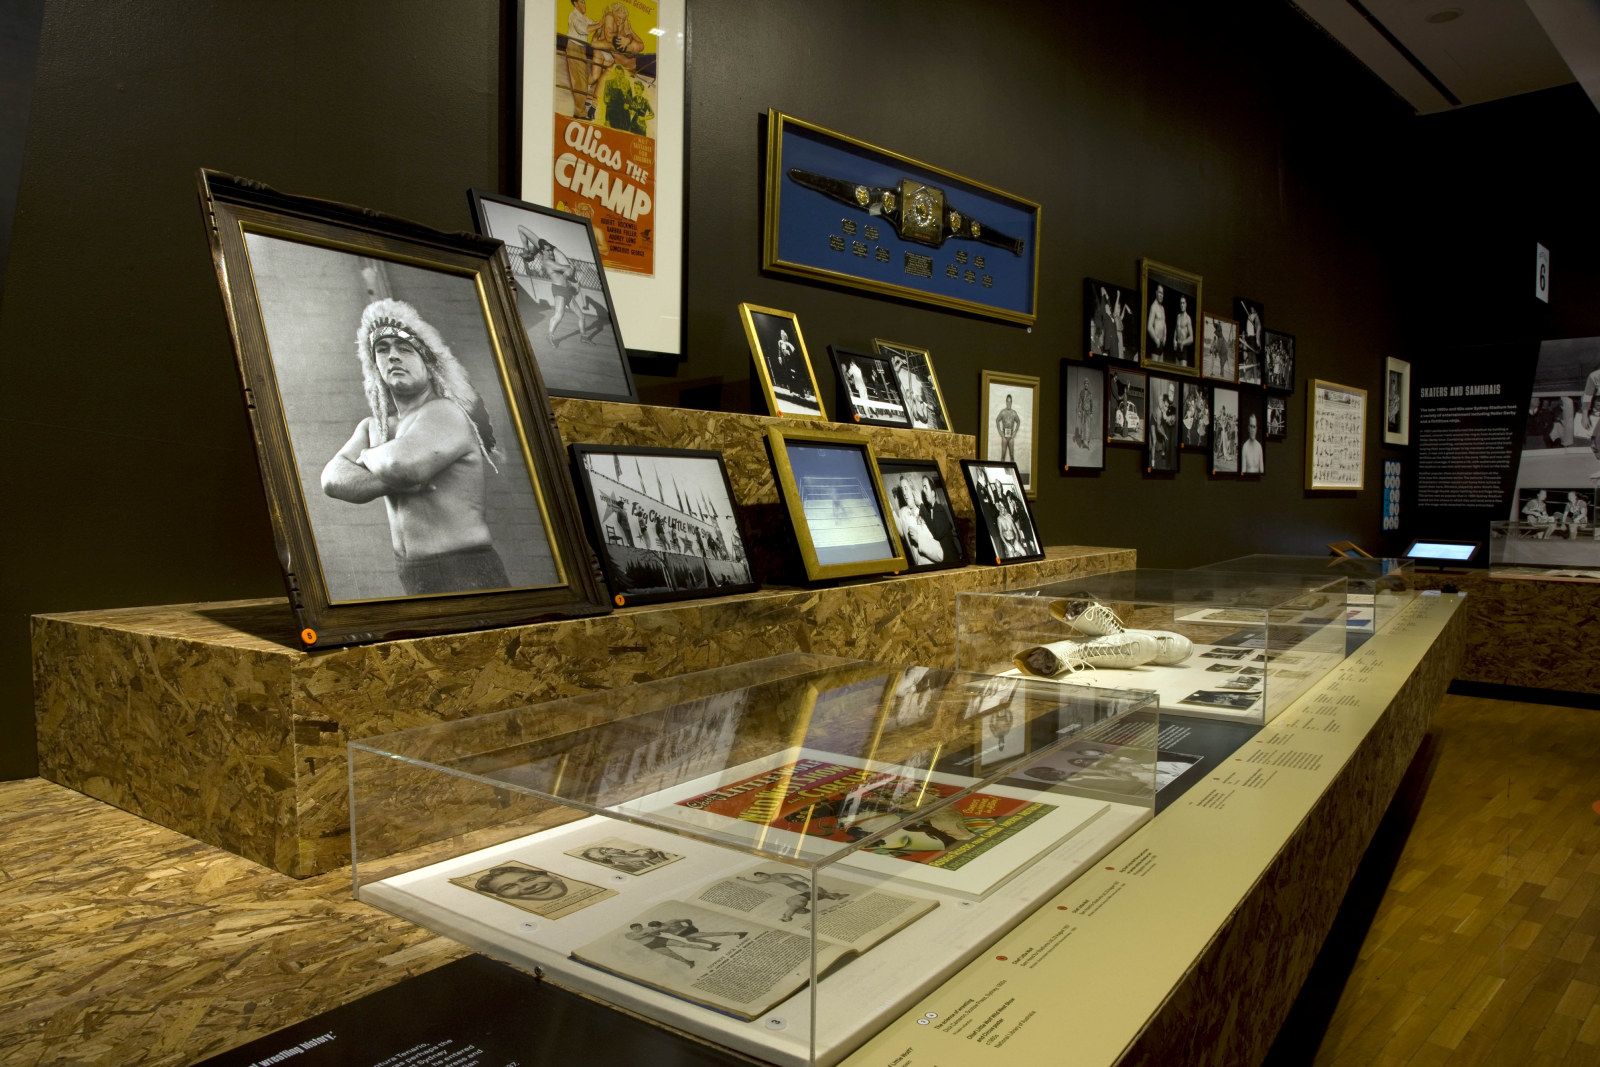 Installation view showing display case with photos and papers.